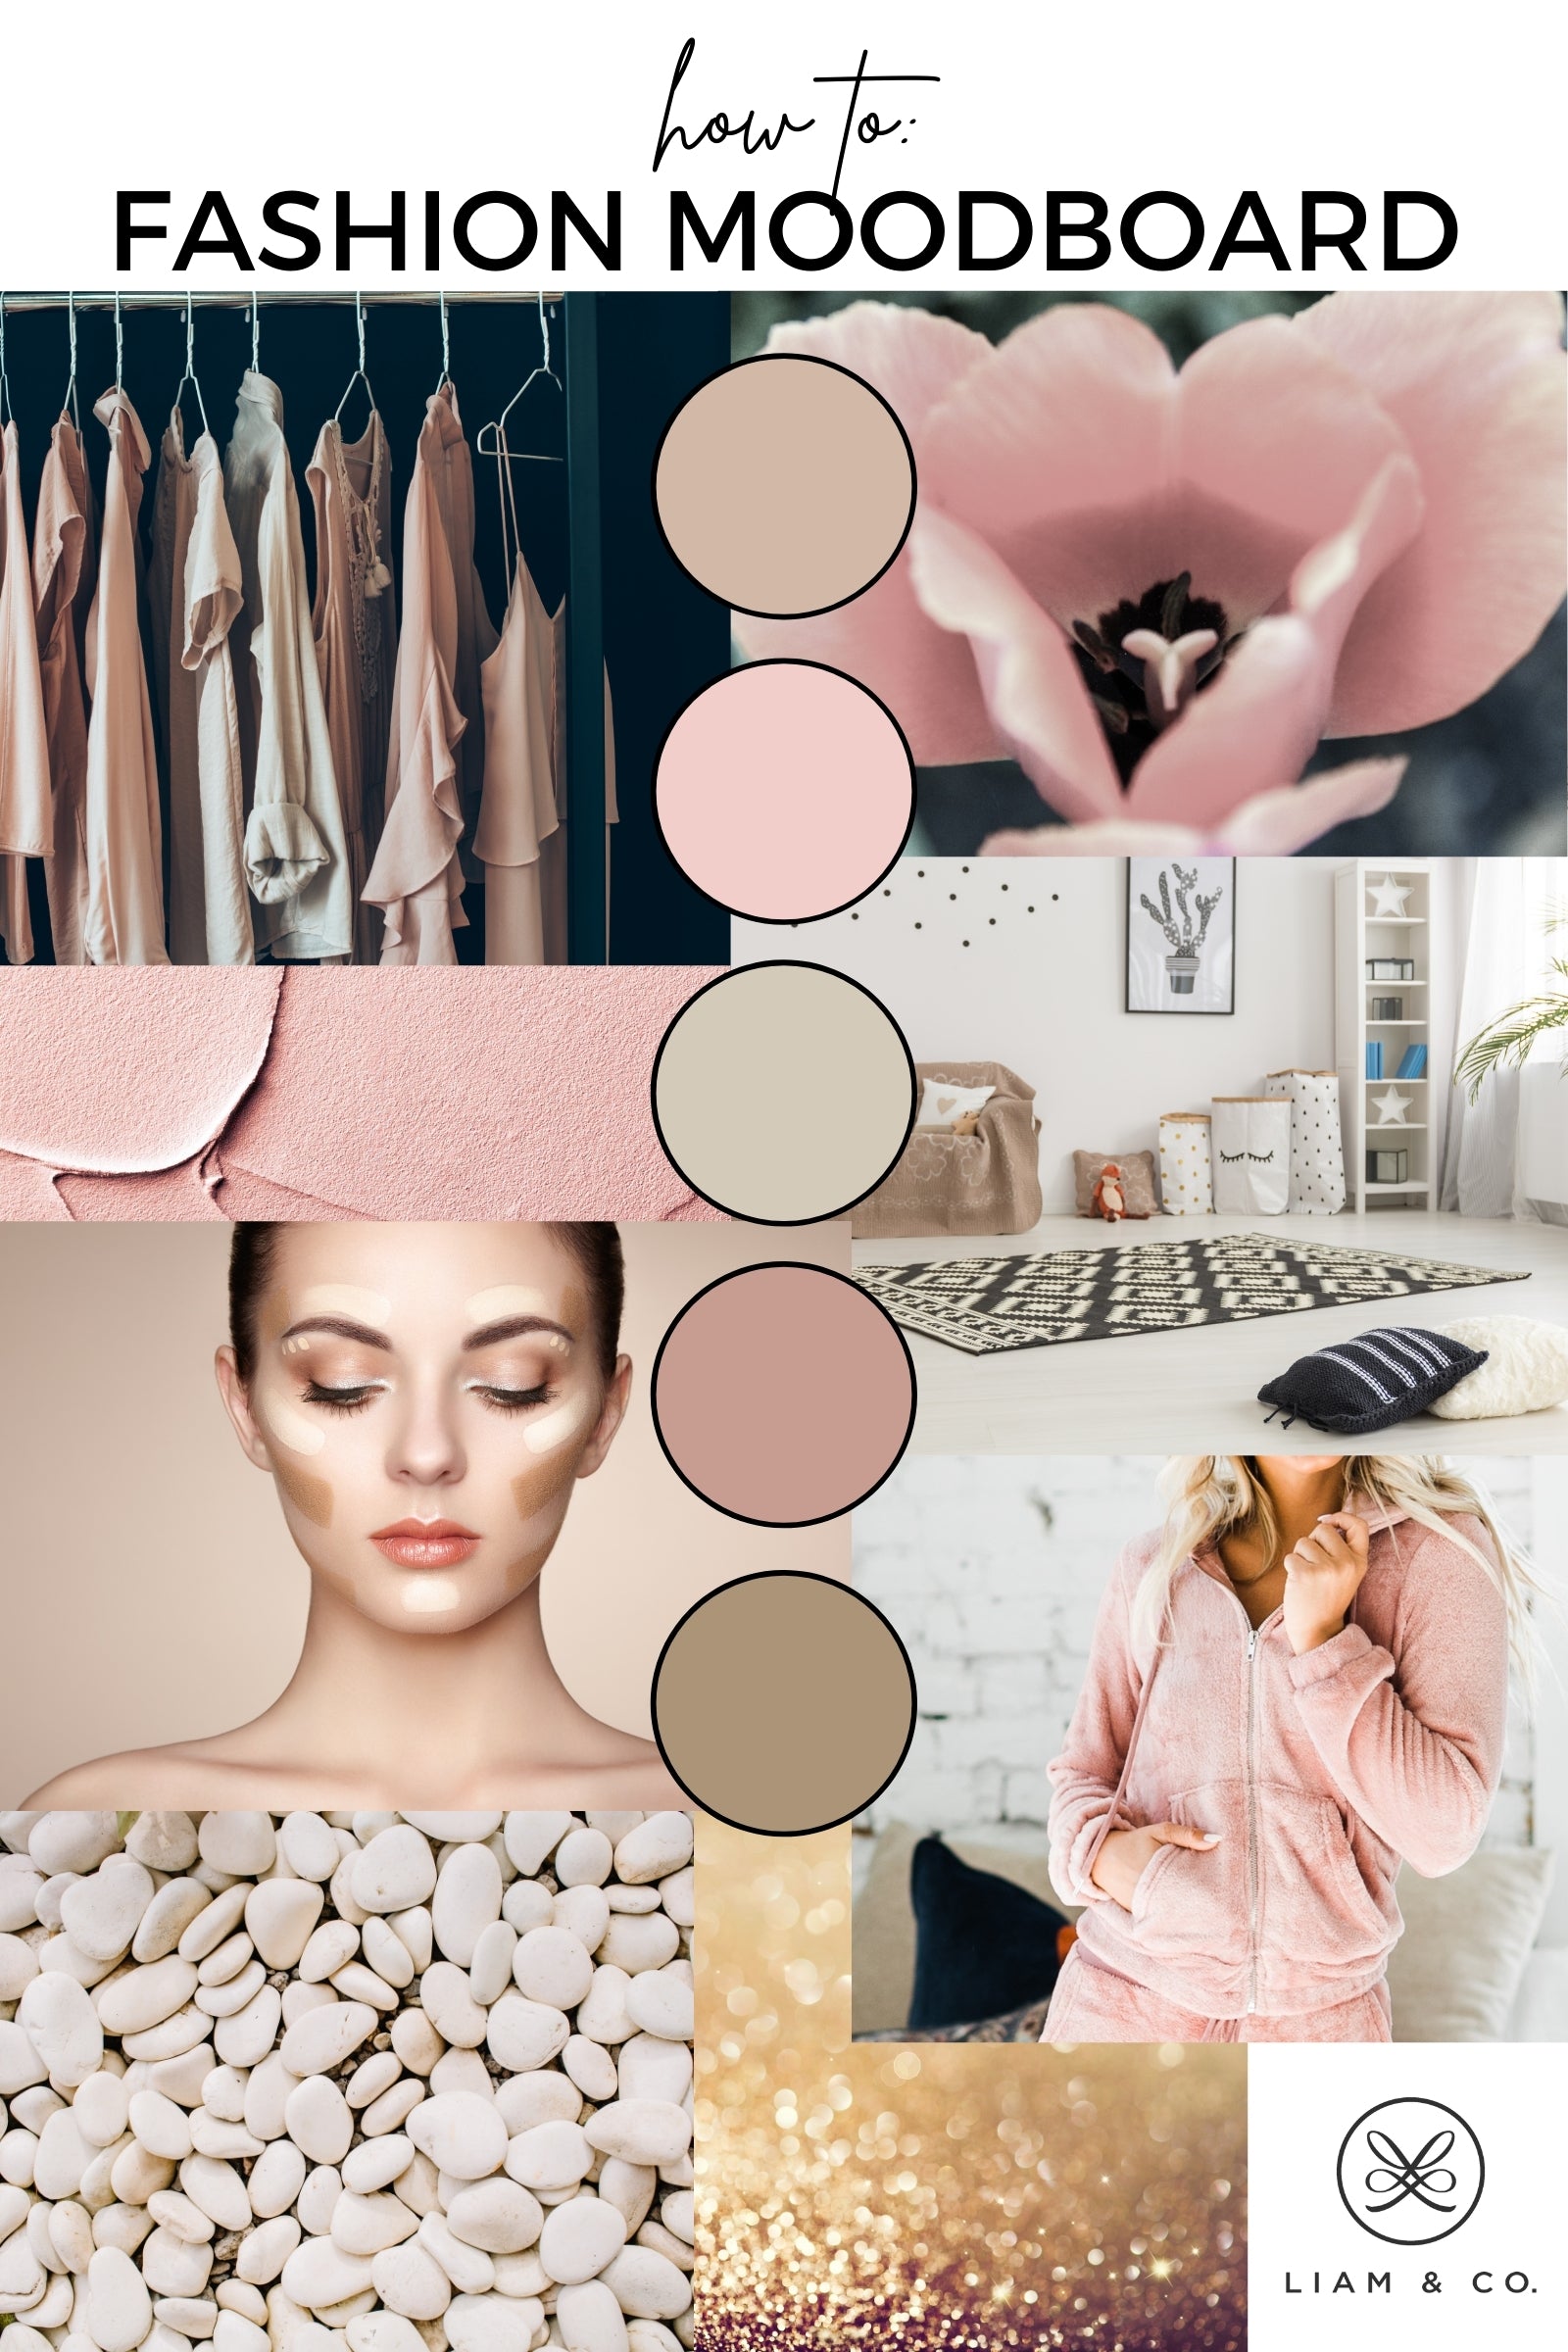 Mood board of examples of fashion magazines for inspiration.